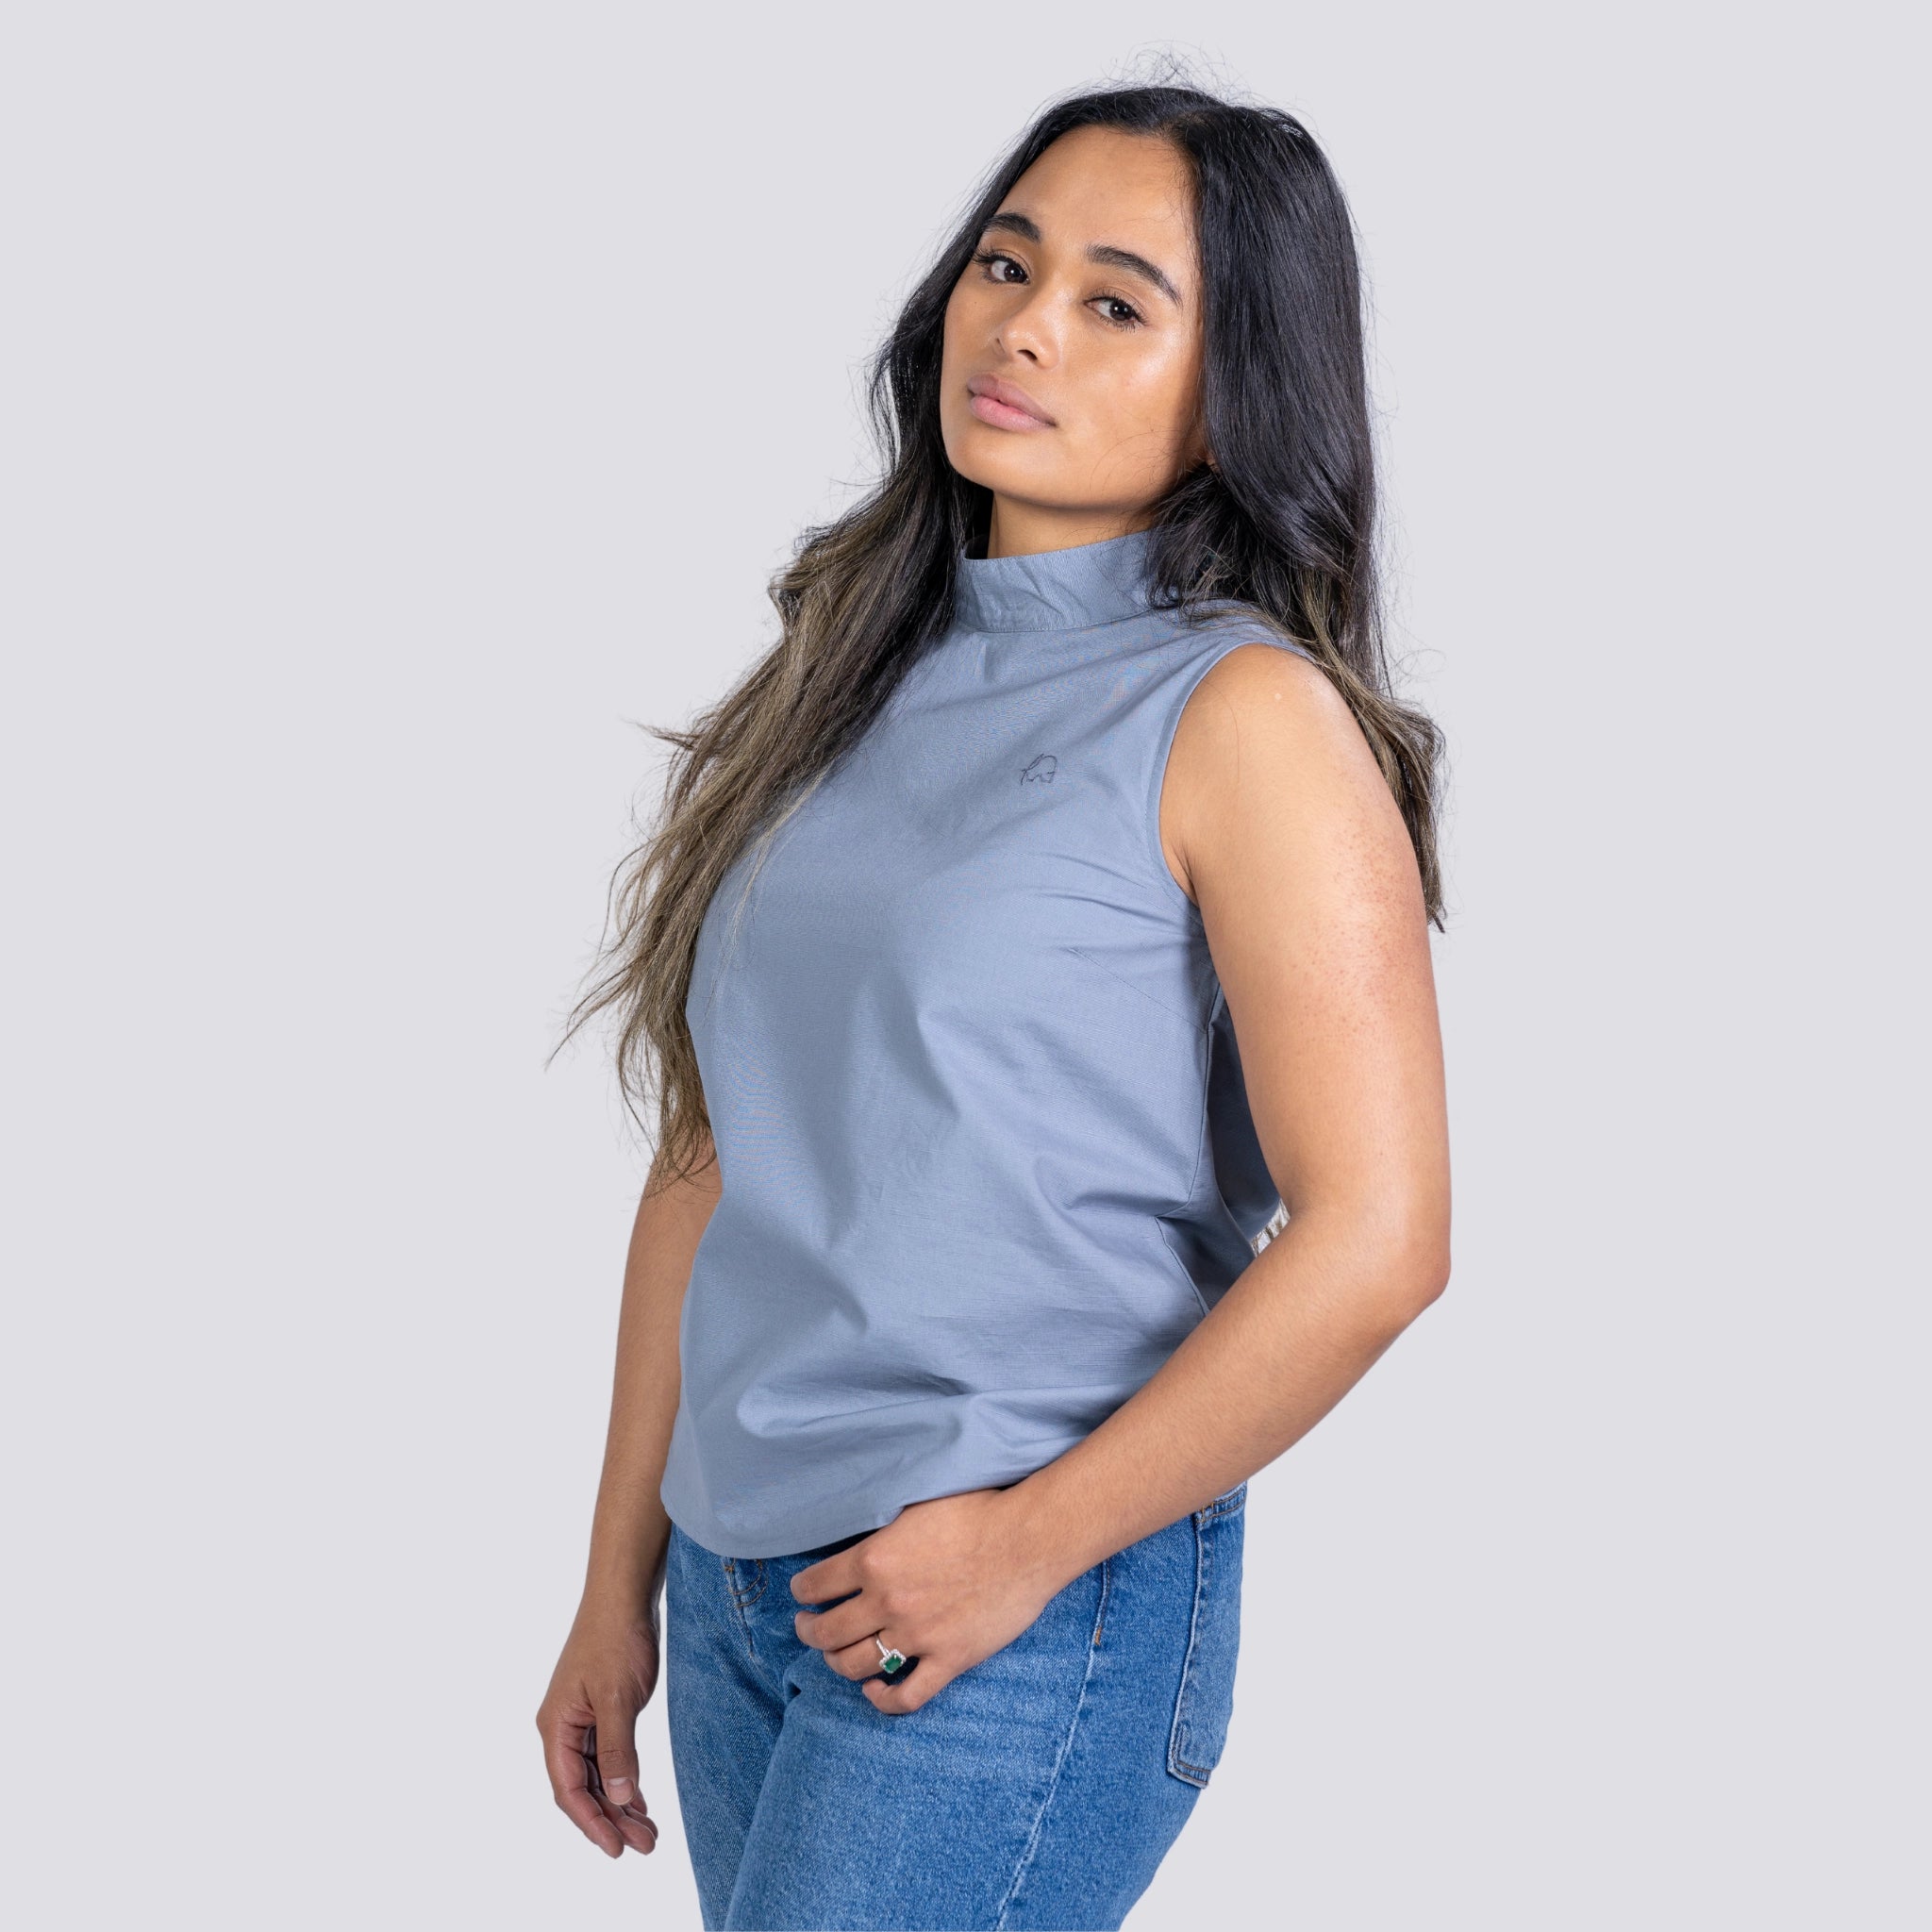 Woman in a Karee Linen Sleeveless Top in Classic Grey and blue jeans, standing with her hand on her hip, looking to the side against a light gray background.